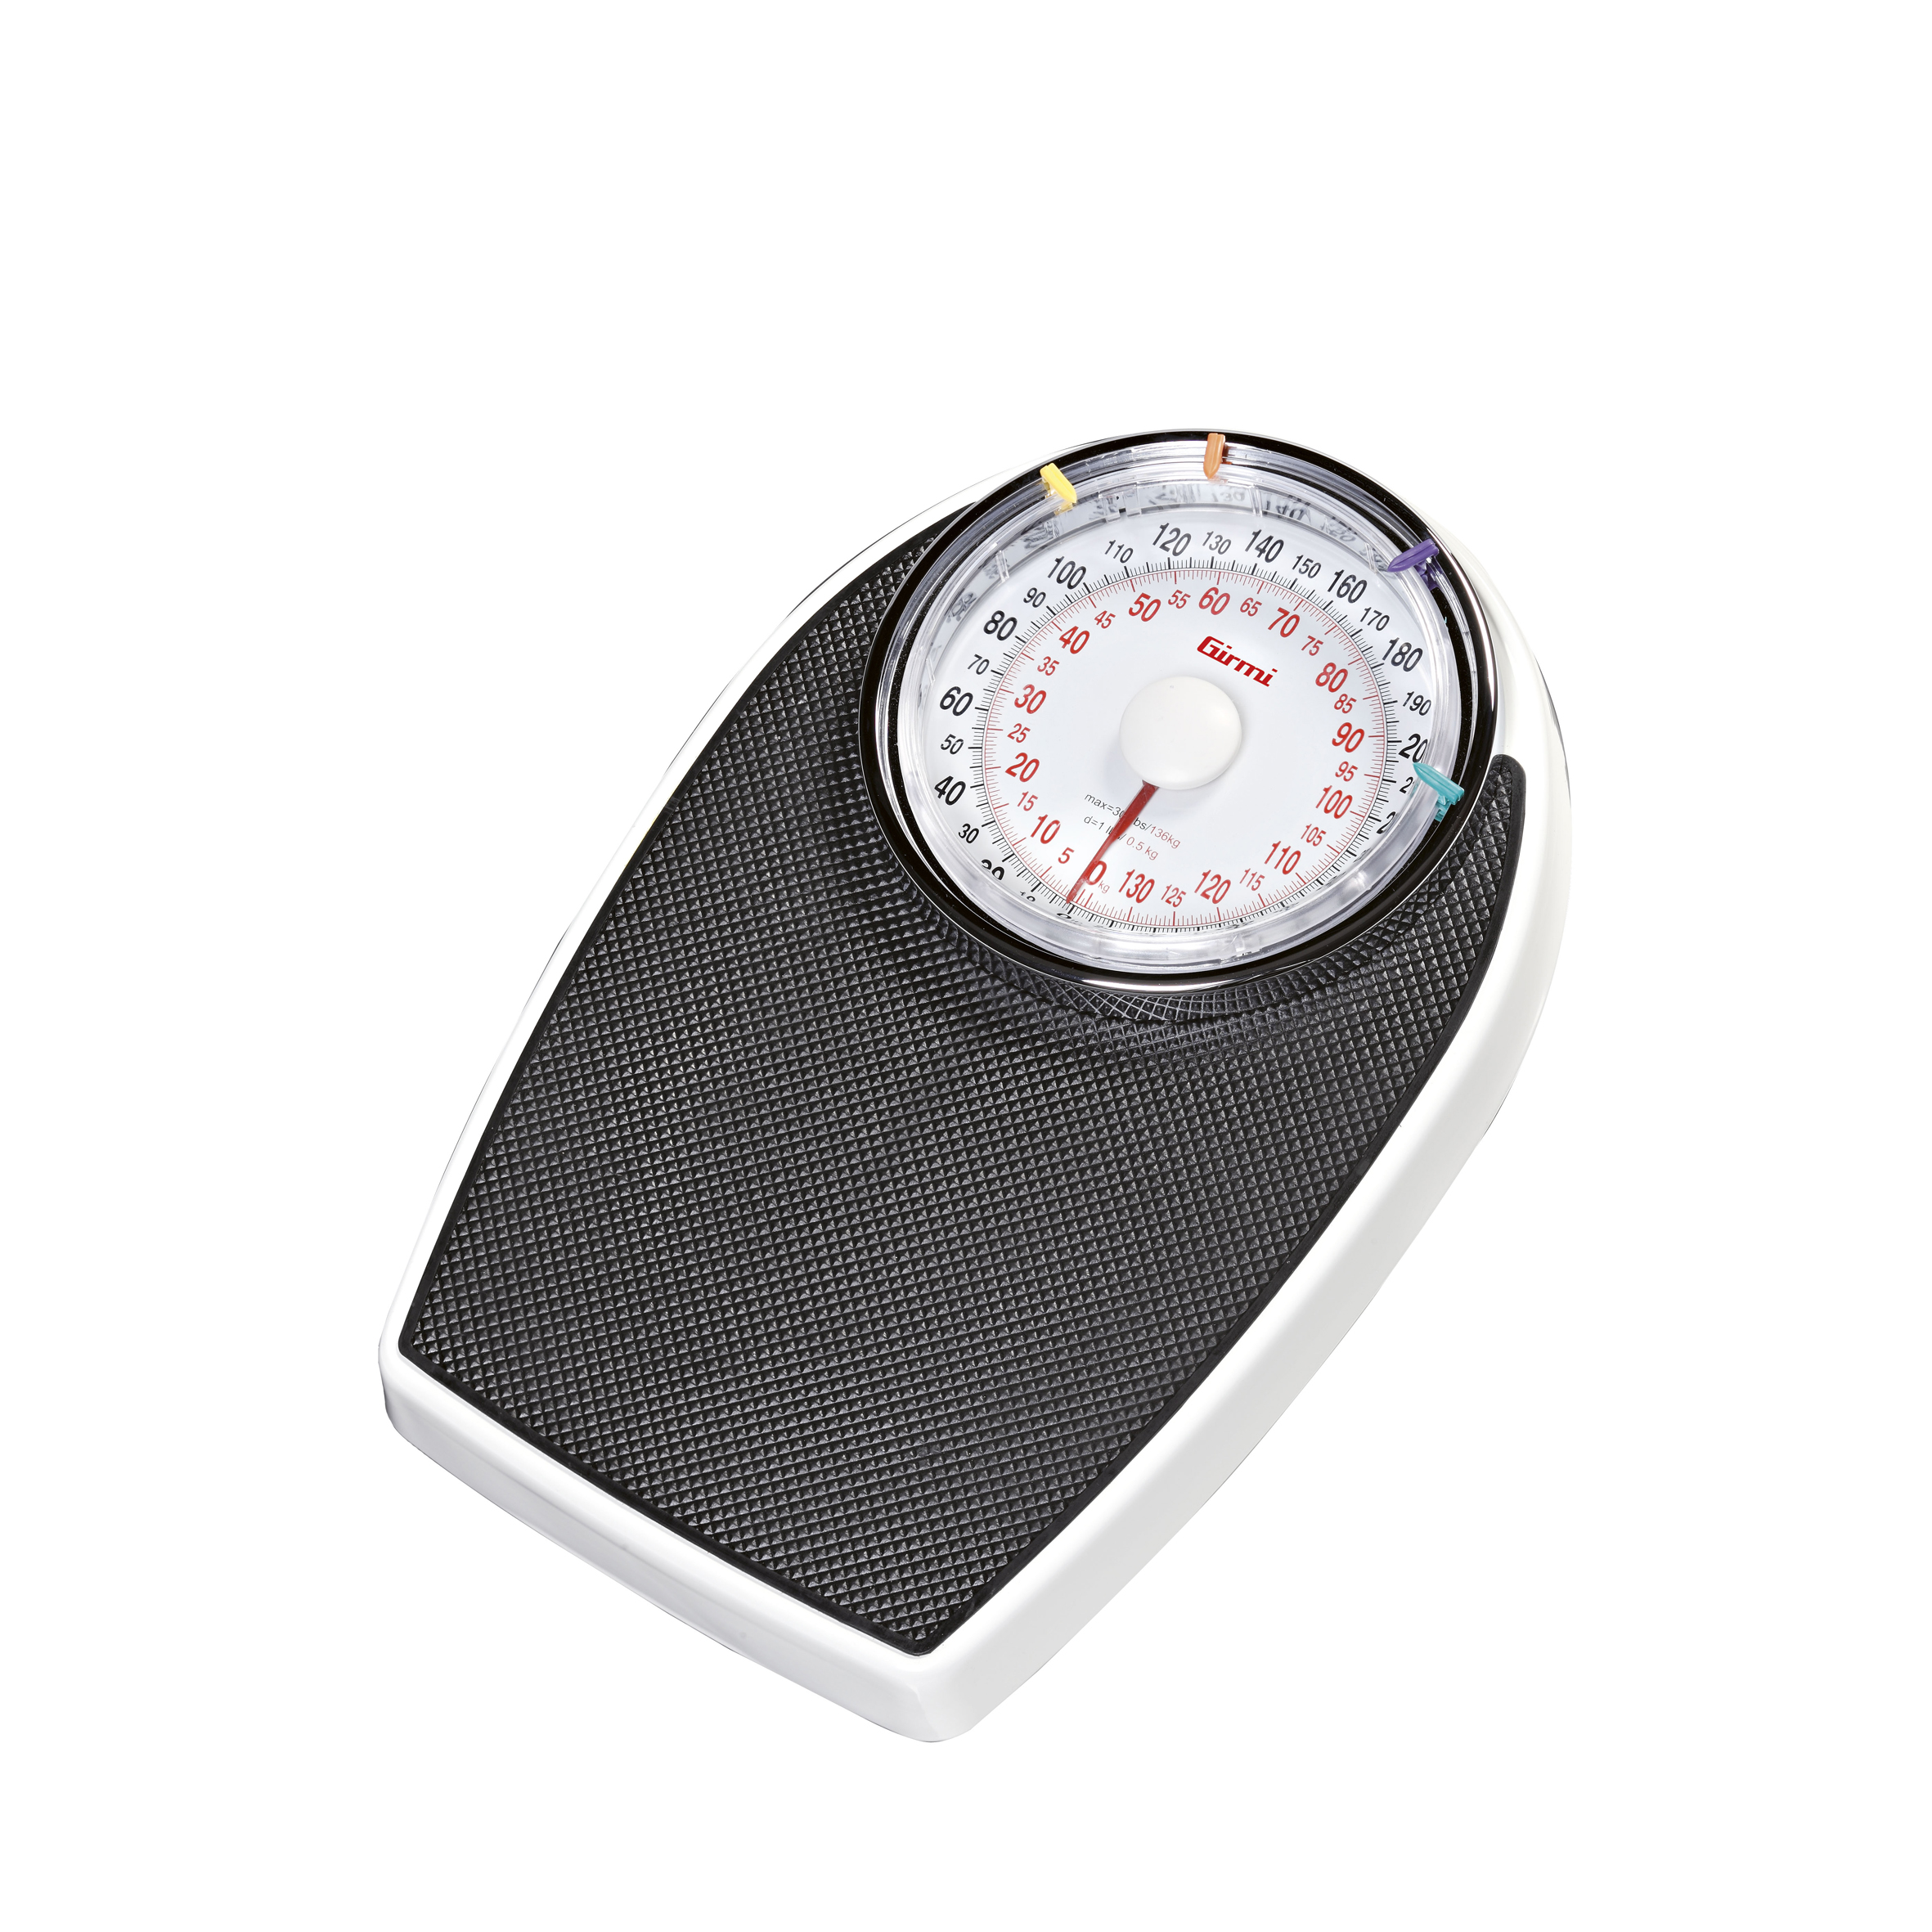 Mechanical Scales in Bathroom Scales 